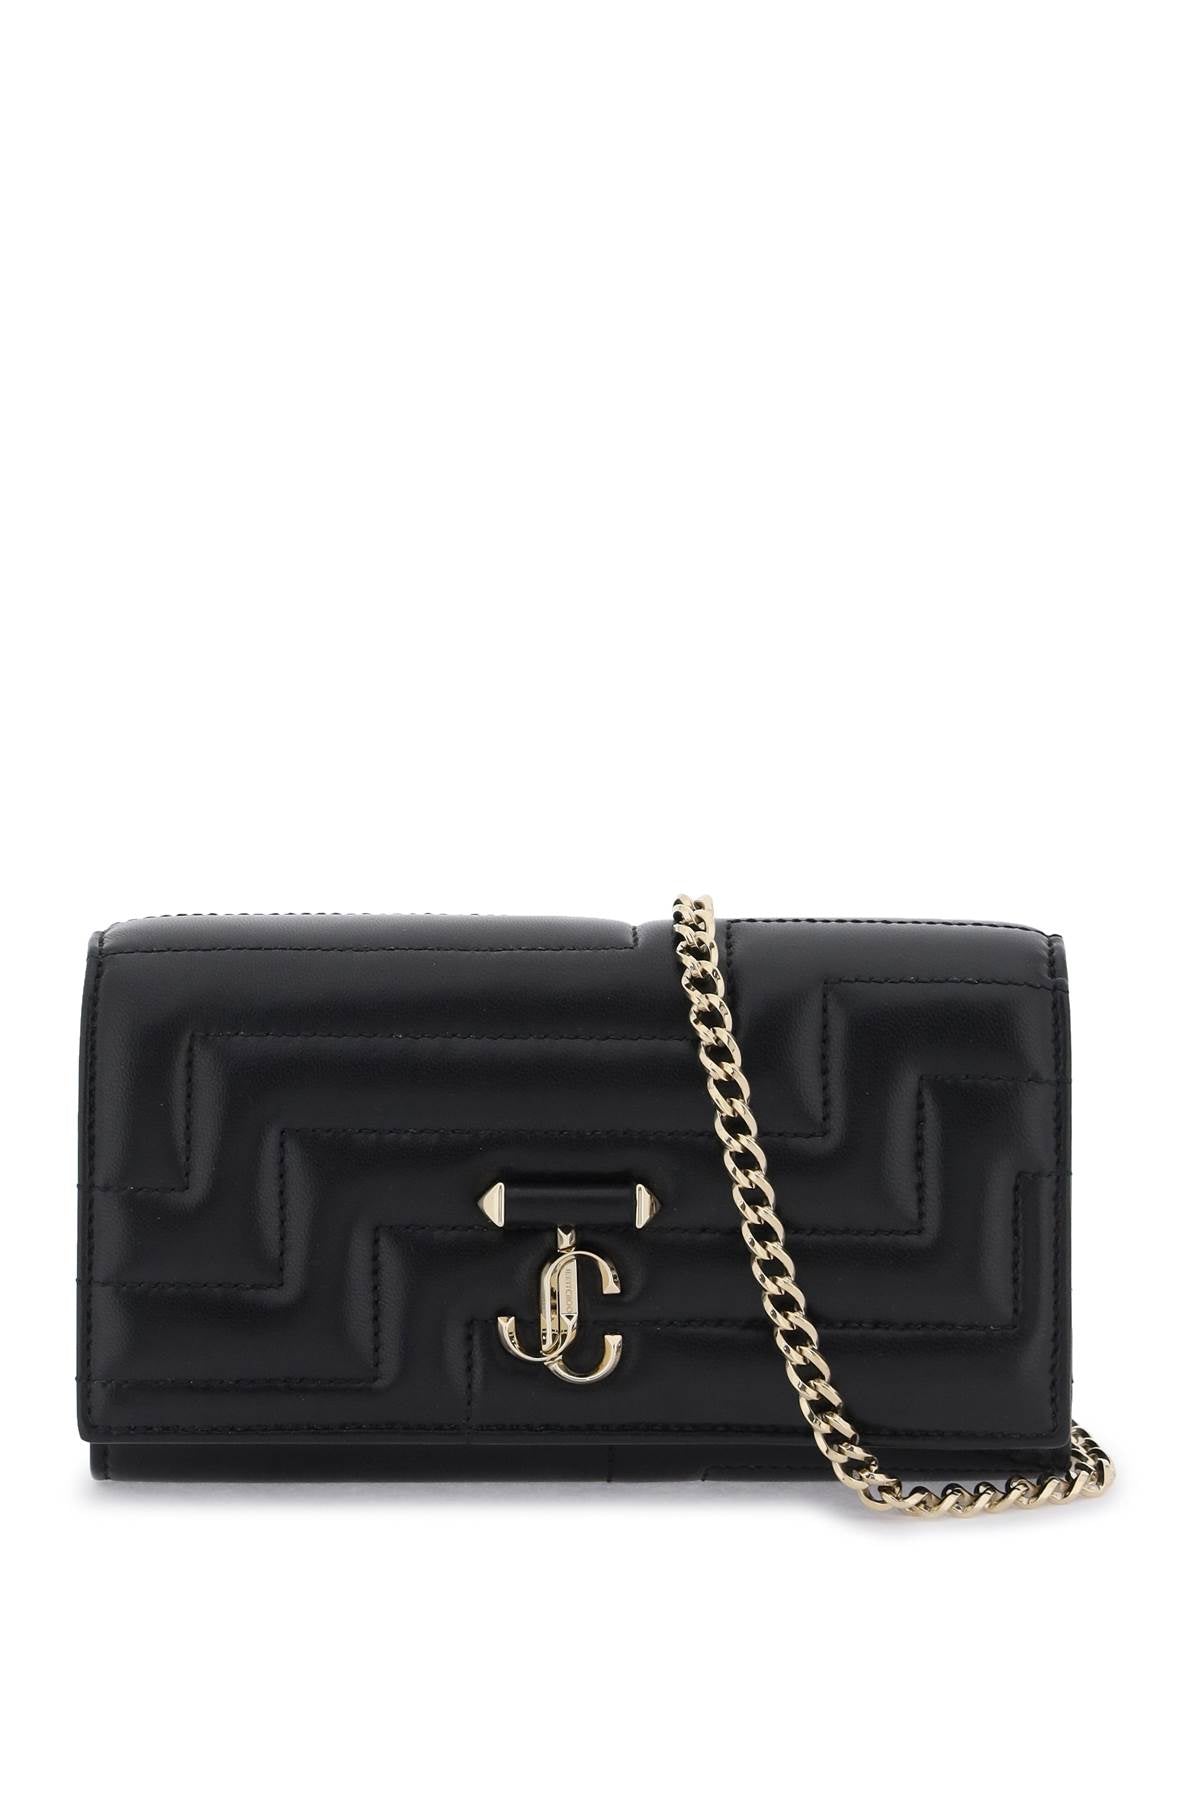 JIMMY CHOO Mini Quilted Nappa Leather Crossbody Bag with Gold Monogram and Chain Strap - Black